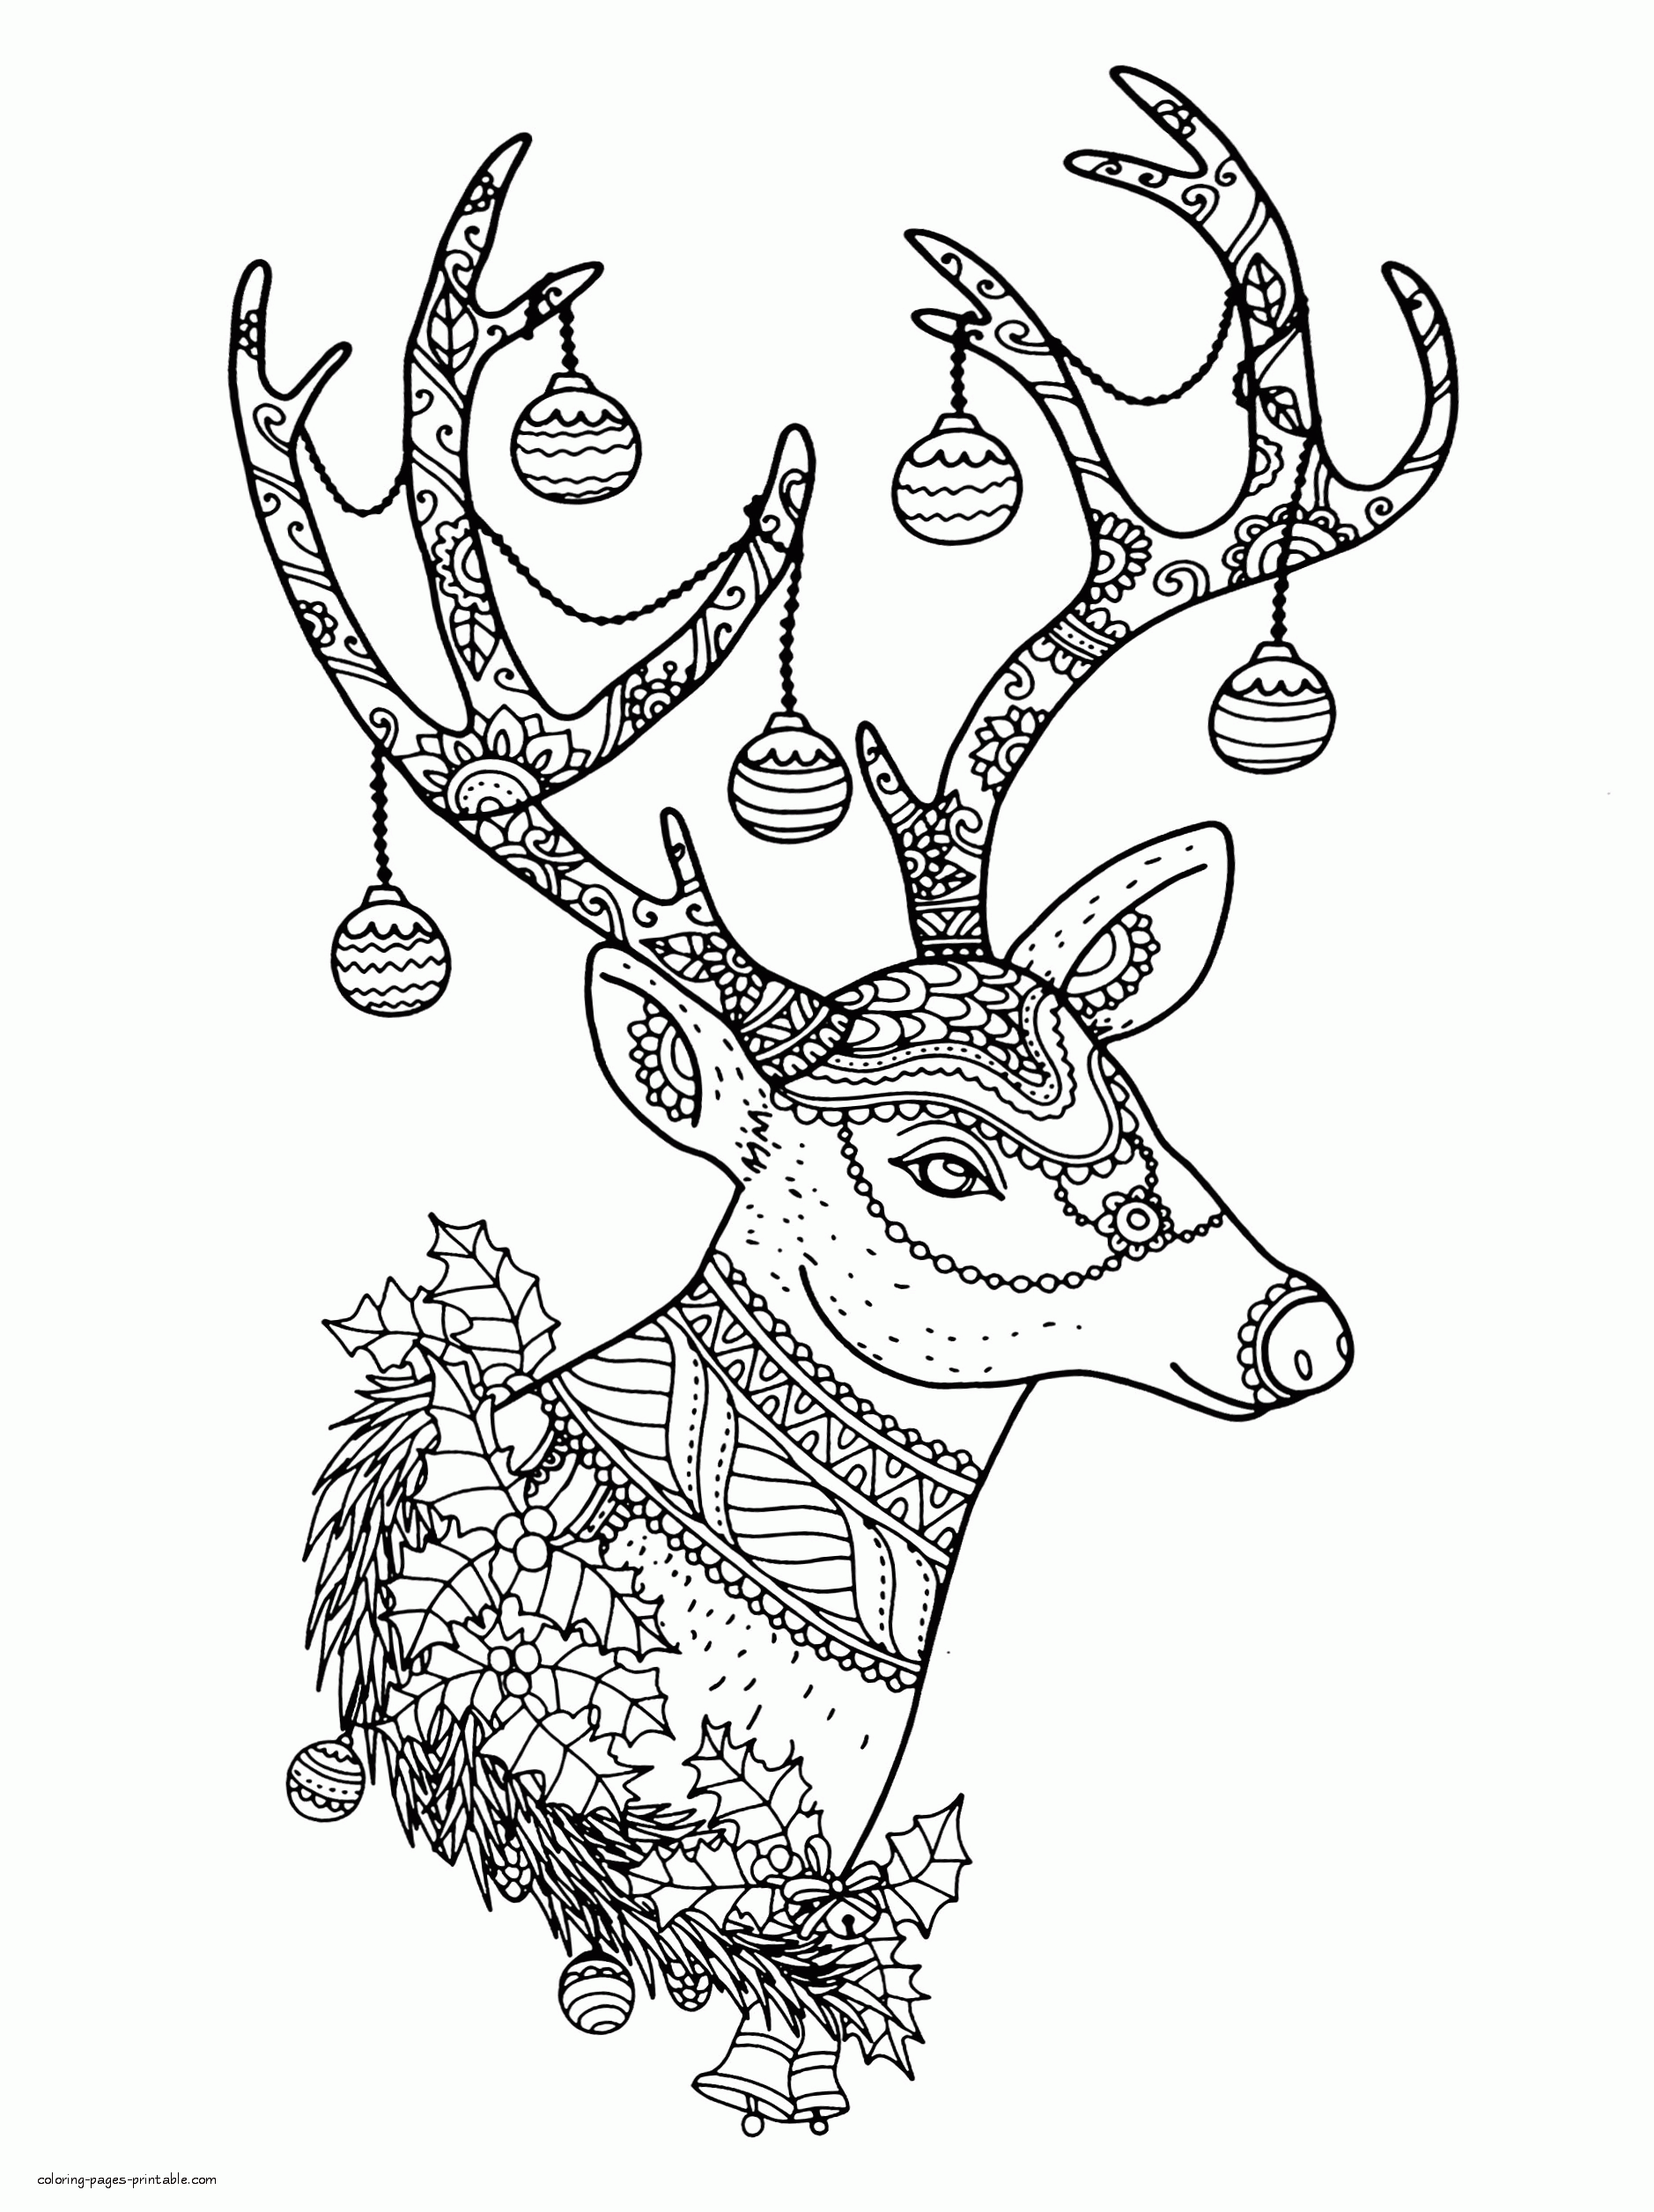 Free Christmas Reindeer Colouring Pages For Adults COLORING PAGES 